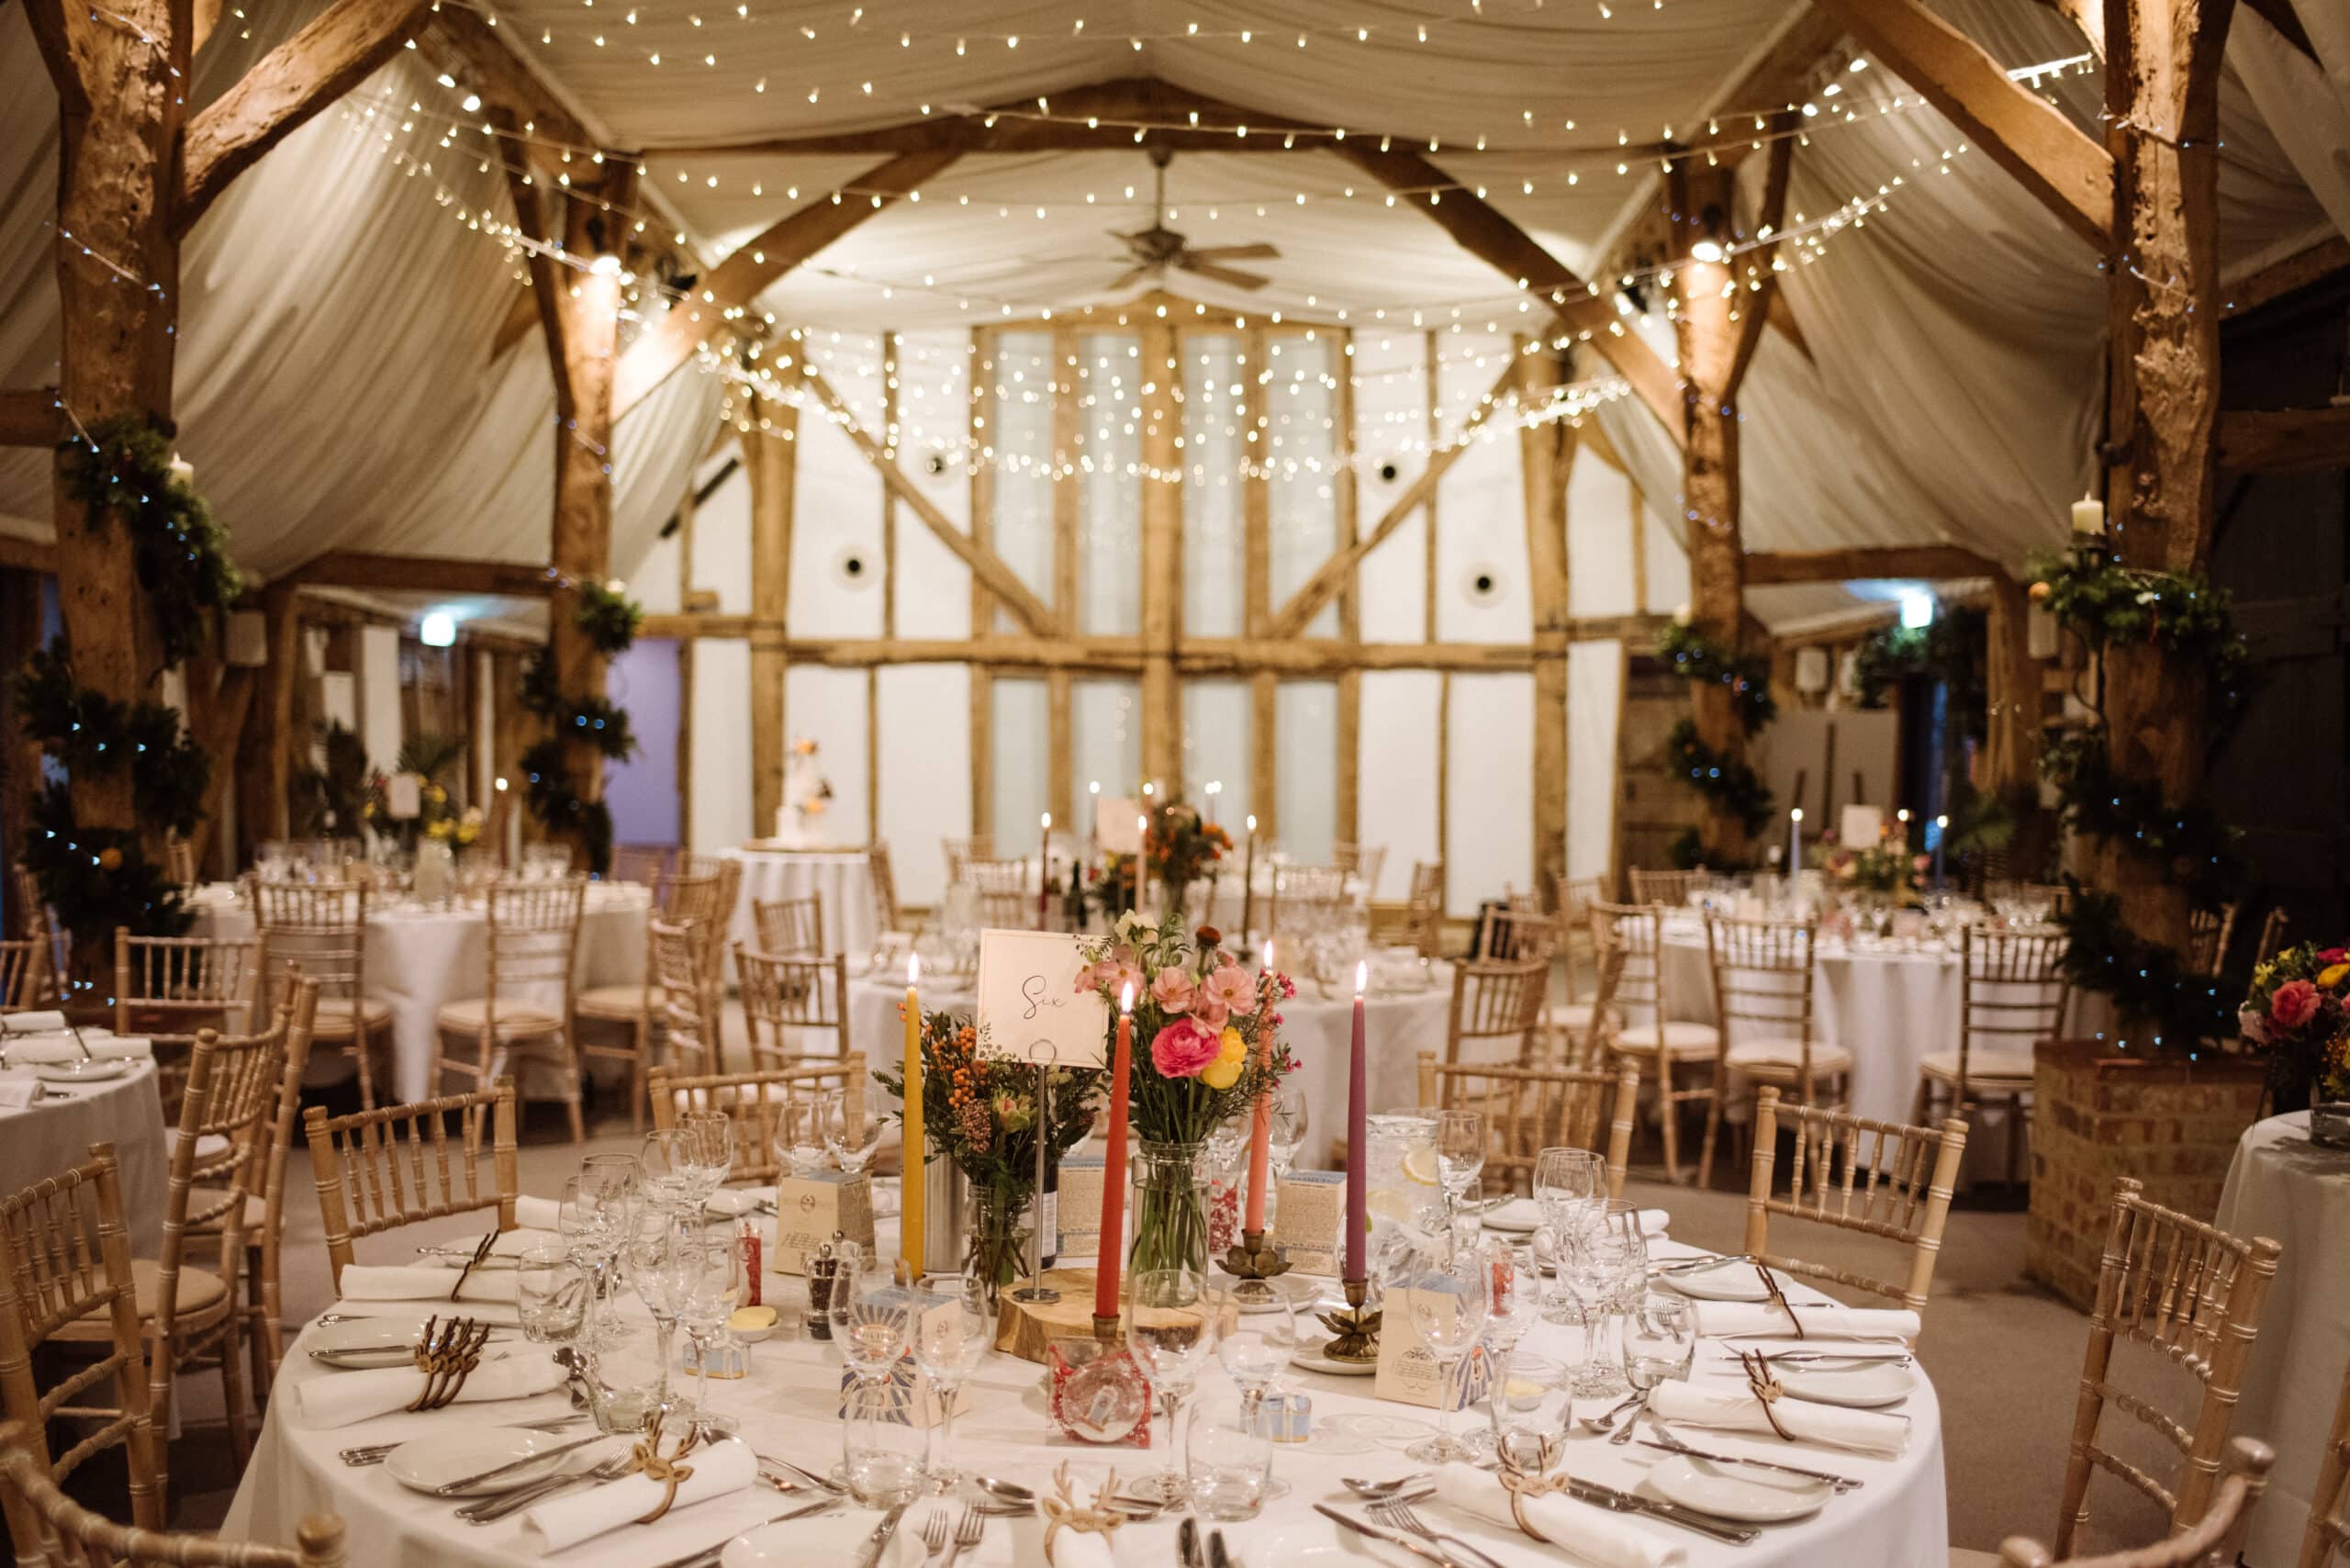 Barn wedding venue set for meal with twinkly fairylights and floral decorations